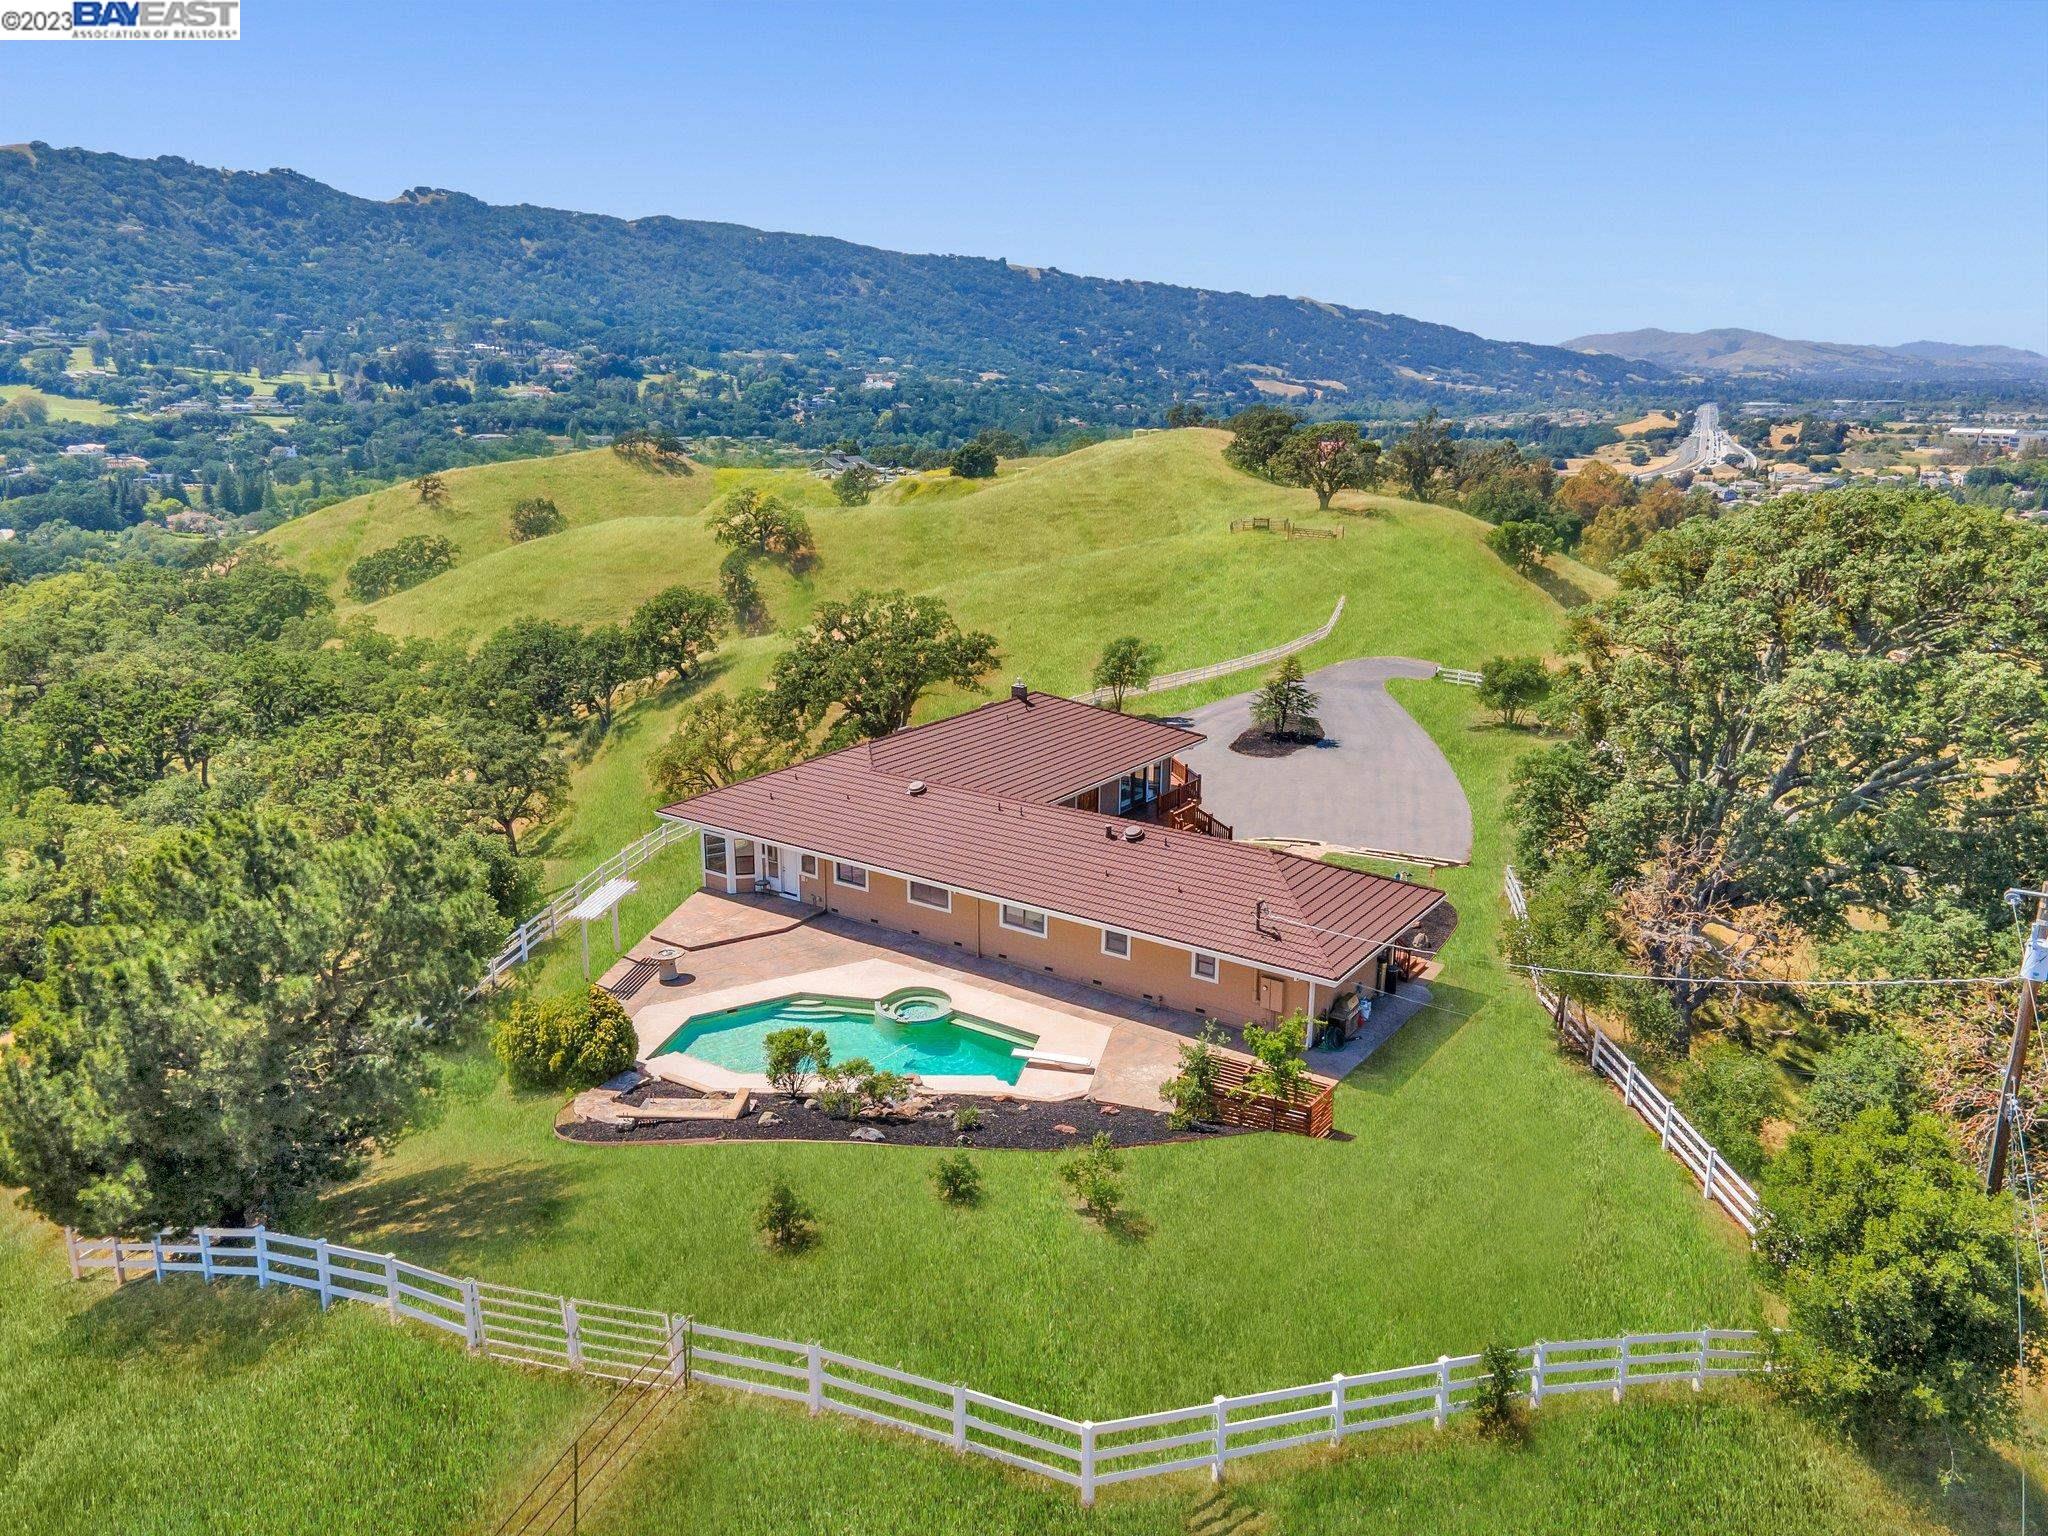 Amazing opportunity to live like you’re on top of the world! Secluded 3455 sqft home nestled on top of 43 acres of rolling hills in Pleasanton. Captivating 360* views of Tri-Valley. Thoughtfully designed one level floor plan with 4 BD / 2 BA , 2- 1/2 baths, great room with fireplace, formal dining room, game room, office space, and large laundry room, over a 3 car garage. The gourmet kitchen has granite countertops, Wolf appliances, and walk-in pantry.  Plenty of space for entertaining family or friends. Whether you’re out front on the wrap around deck, inside, or in the beautiful backyard oasis with sparkling pool and waterfall. There are 2 large workshops totaling 3500 sqft and a 7 stall barn along the private driveway with electric security gate. Easy access to 680 freeway, and a short commute to Silicon Valley. Minutes to award winning schools and charming downtown with great restaurants and shopping. Close to Livermore wineries and less than 1 mile to Callippe Preserve Golf Course. This property is truly one of a kind that you won’t want to miss!!